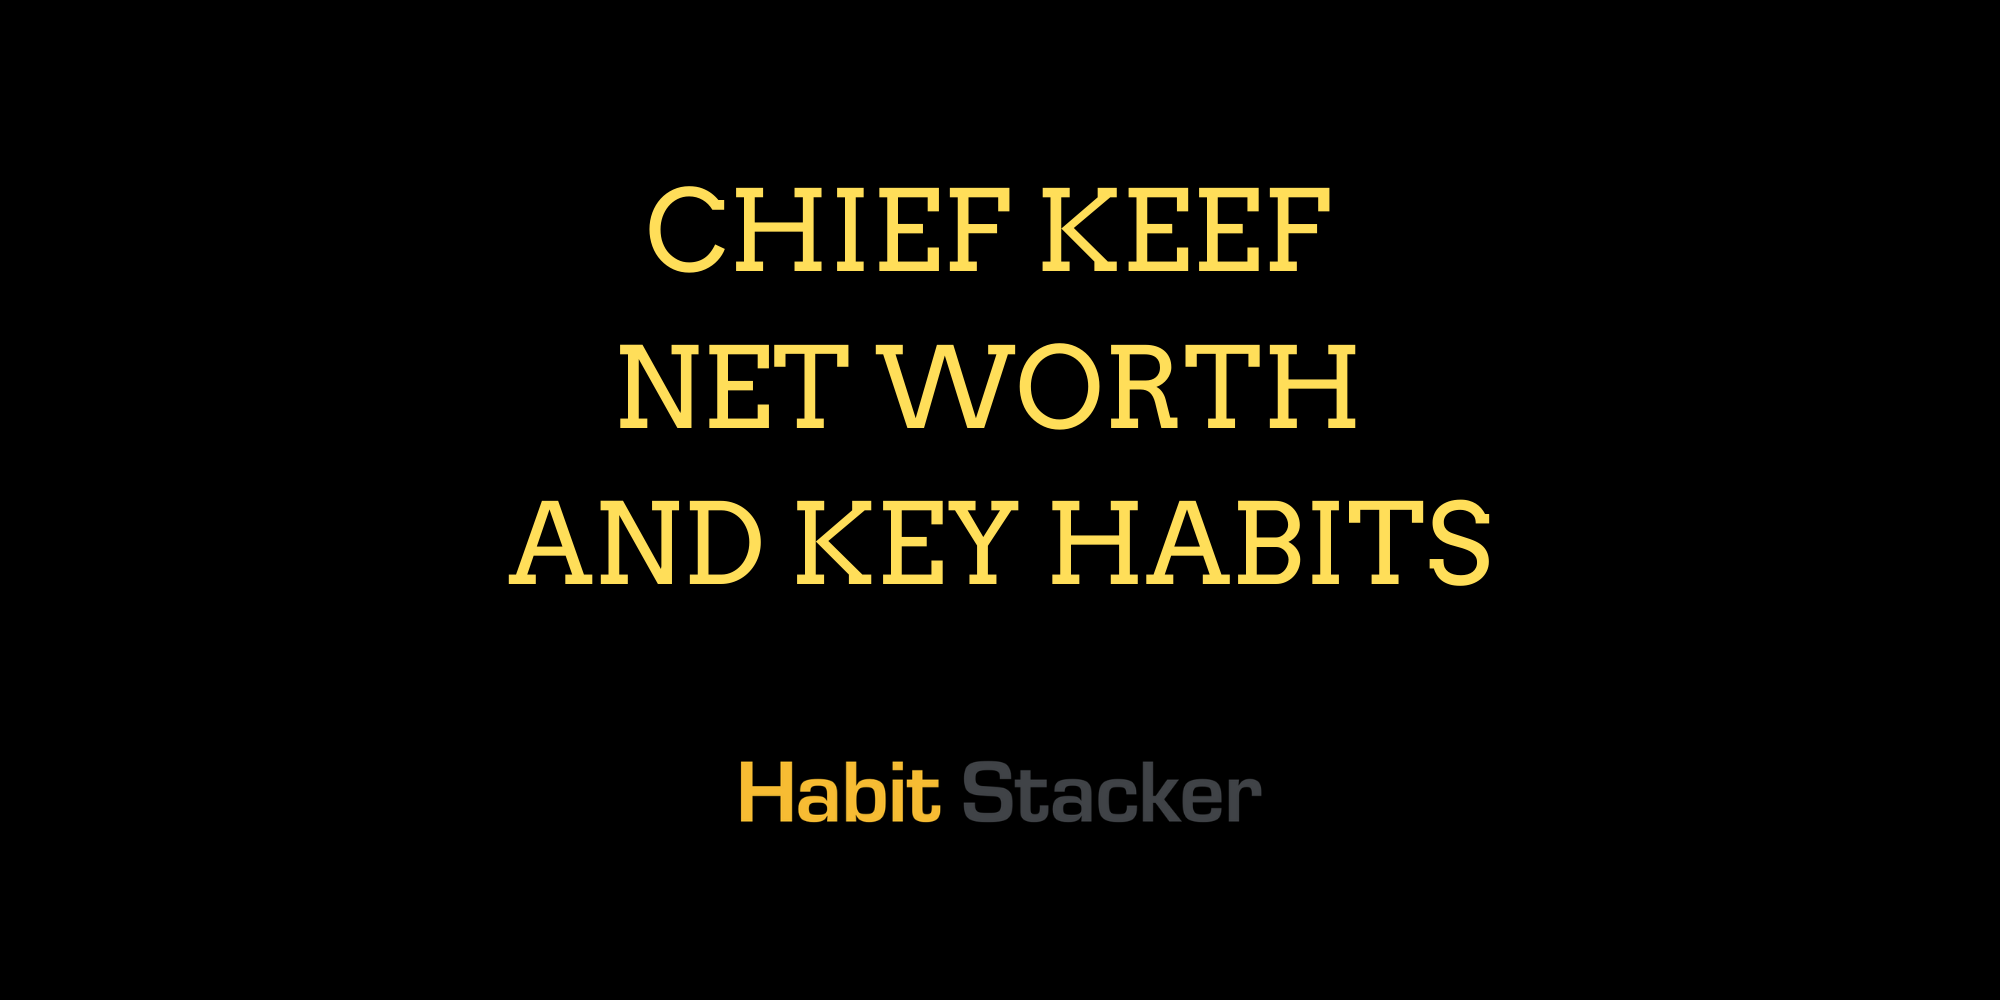 Chief Keef Net Worth and Key Habits